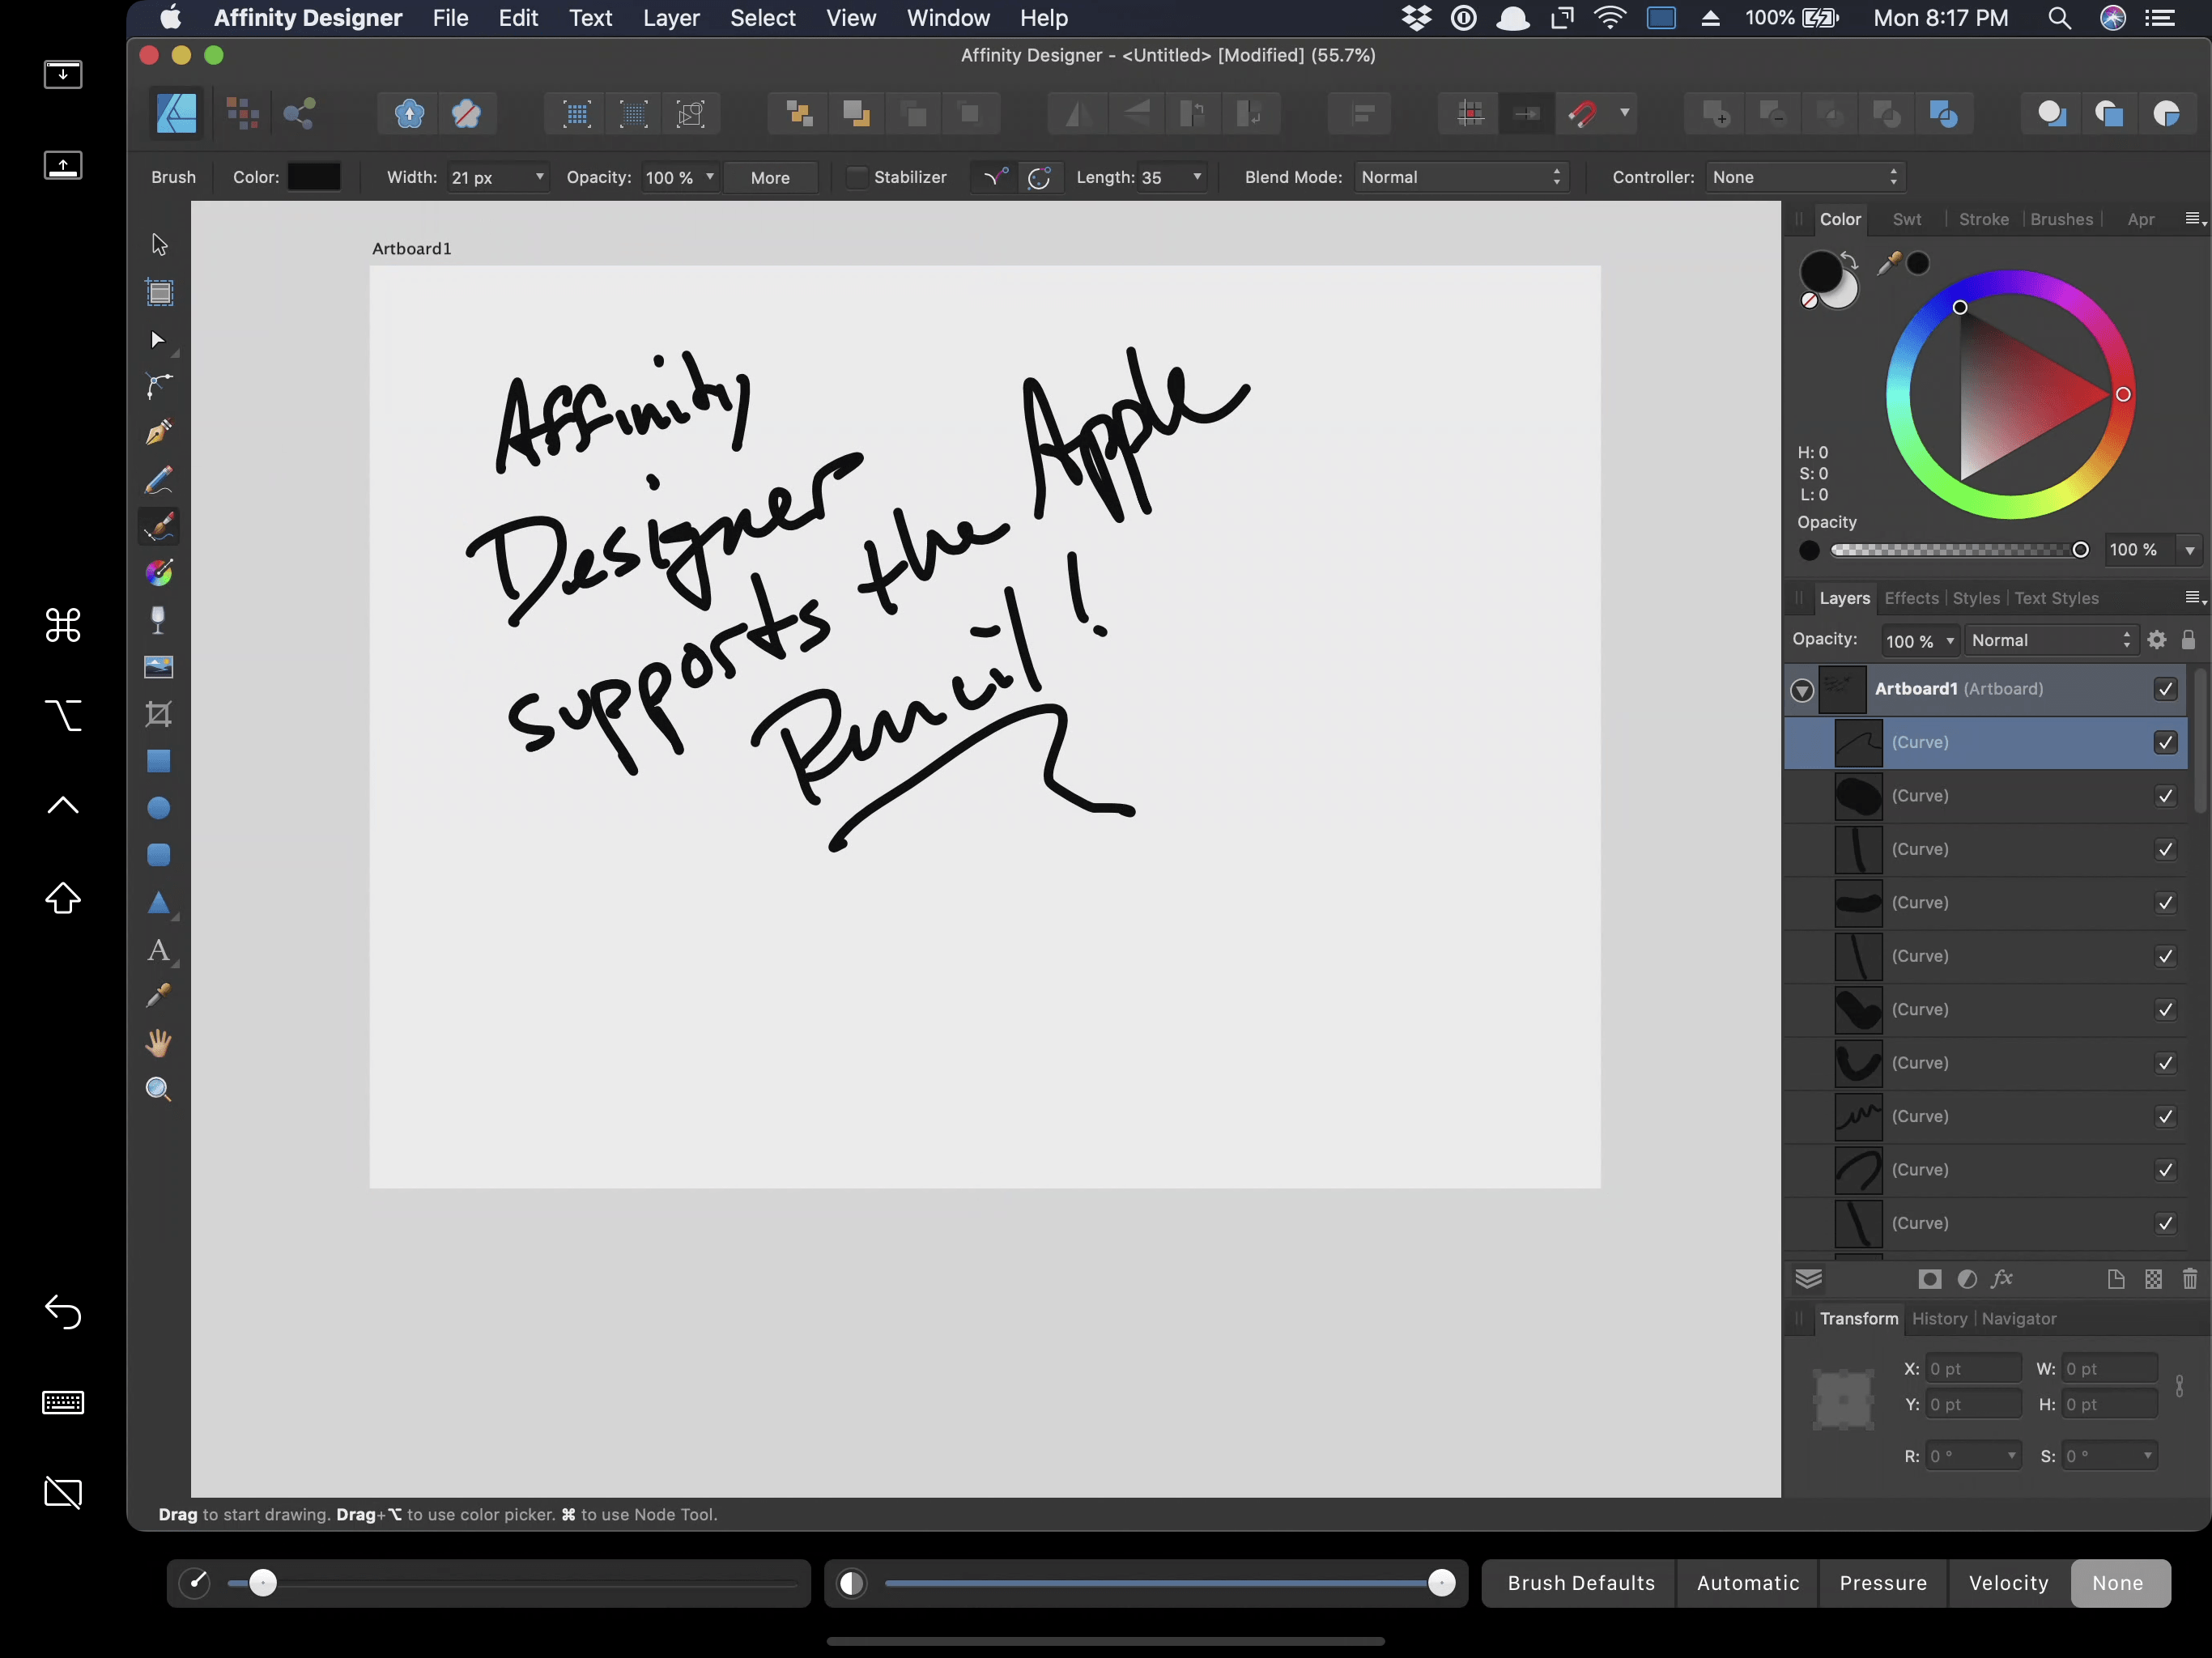 The Apple Pencil can be used to draw in Mac apps that have tablet support like Affinity Designer.